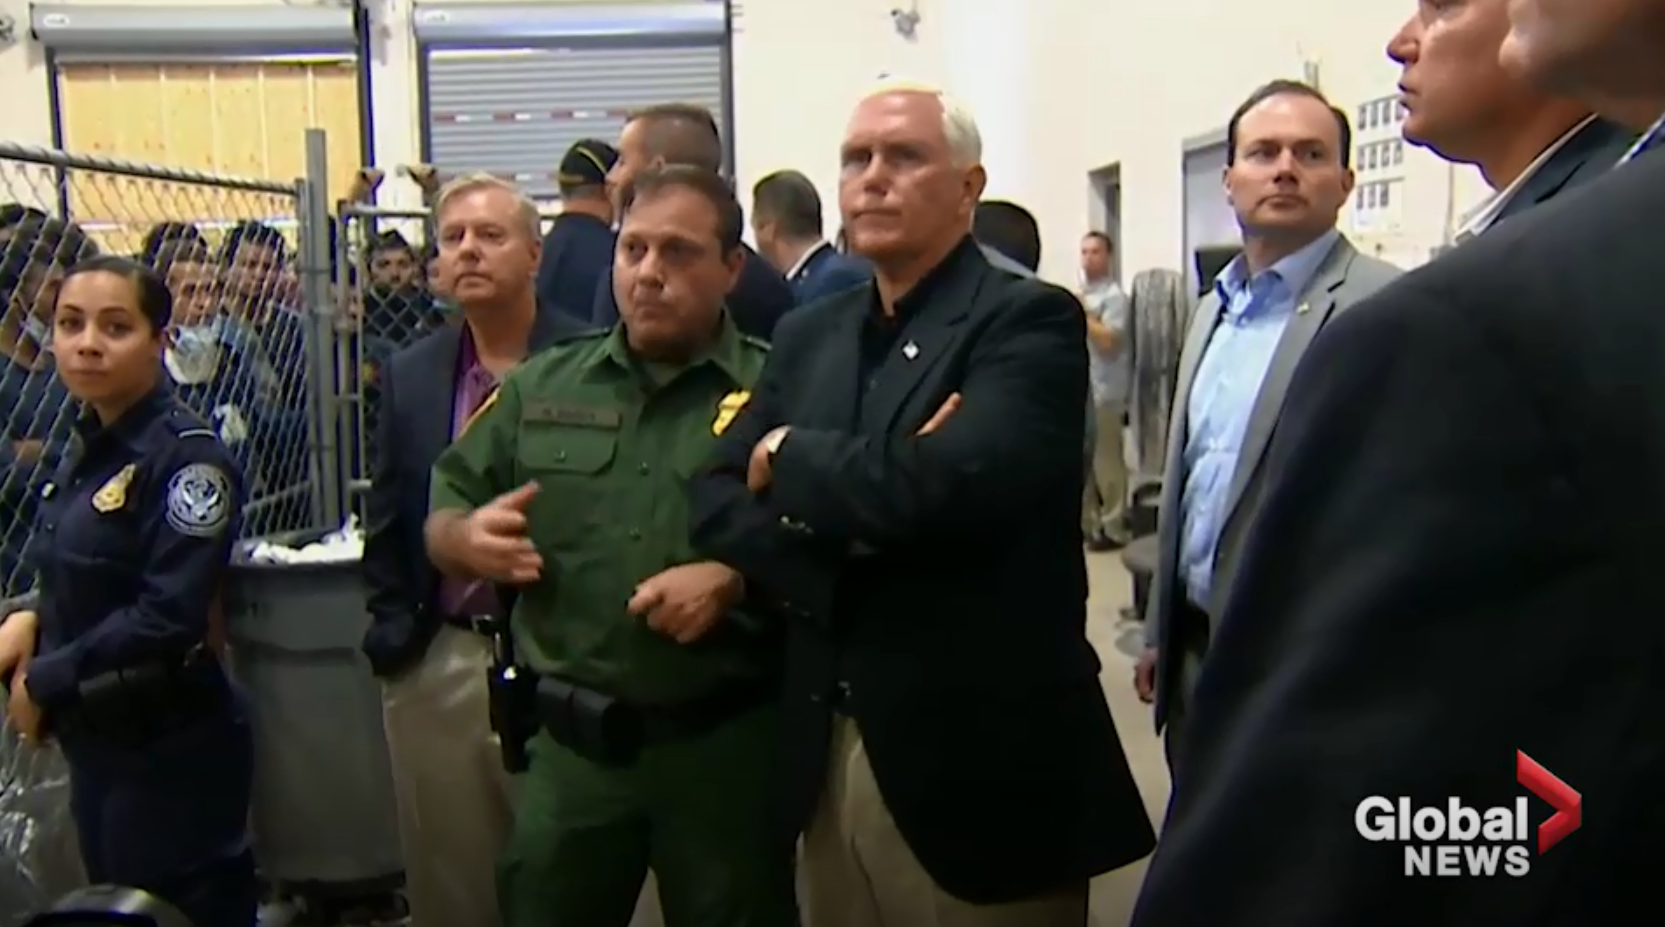 video-of-pence-at-crowded-detention-centre-sparks-backlash-from-democrats.png